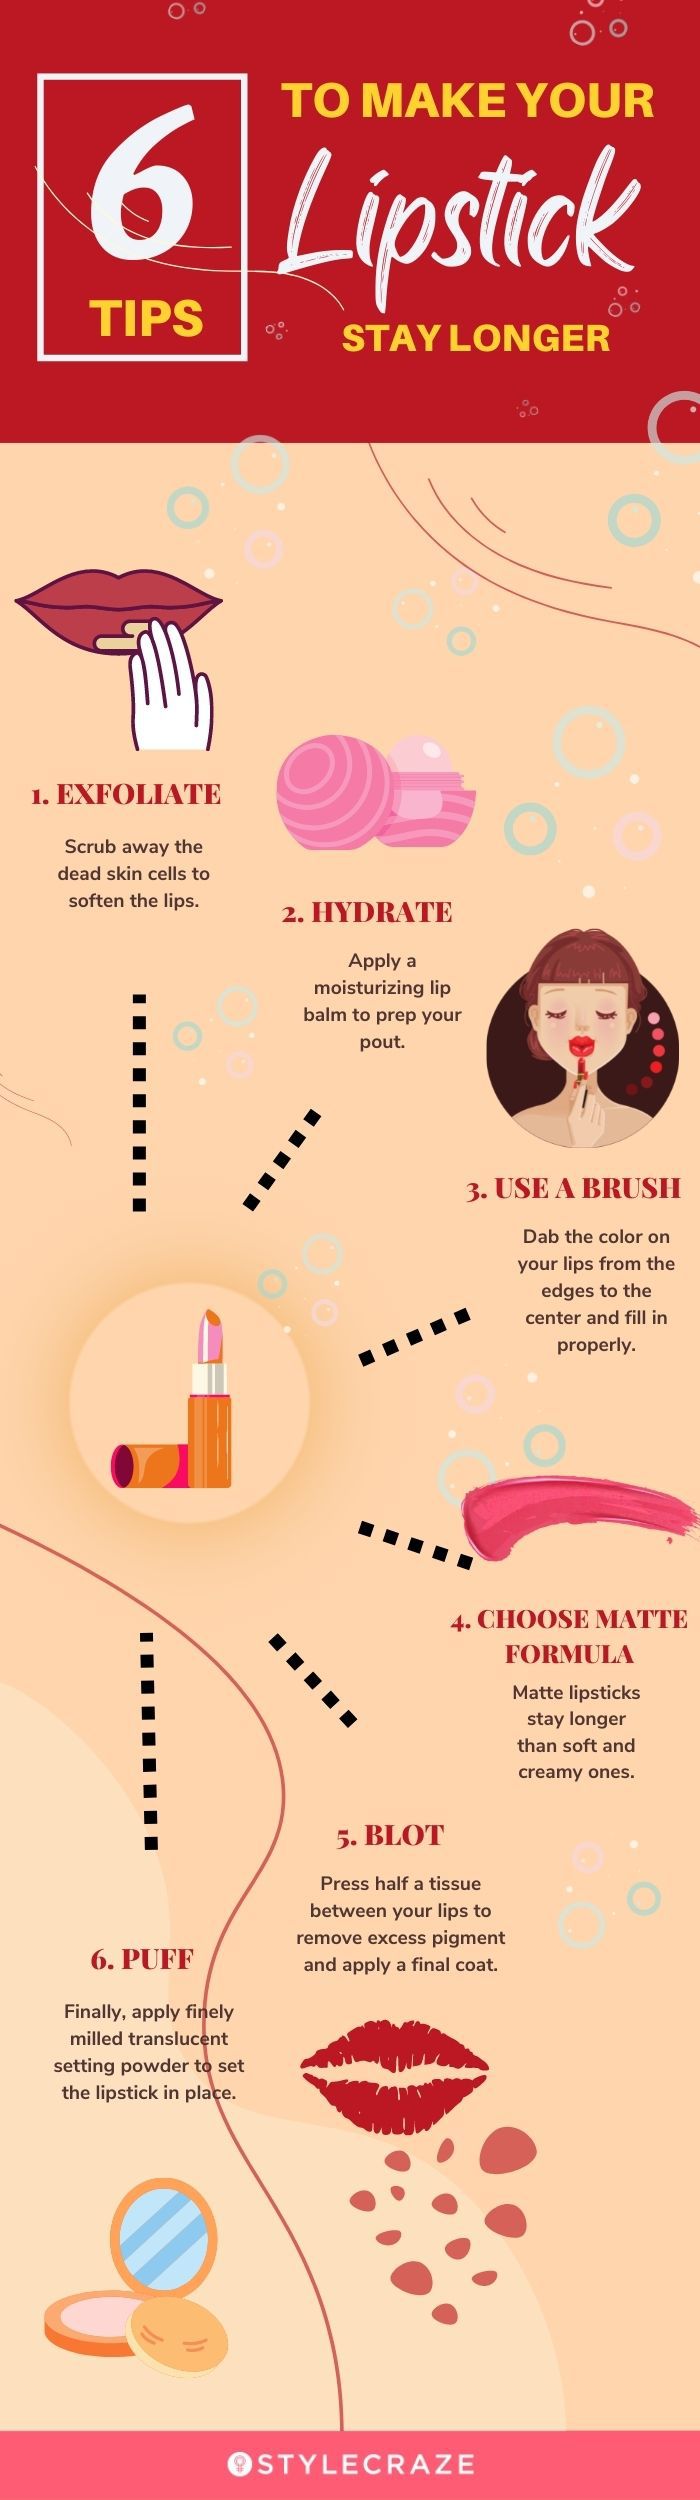 tips to make your lipstick stay longer [infographic]